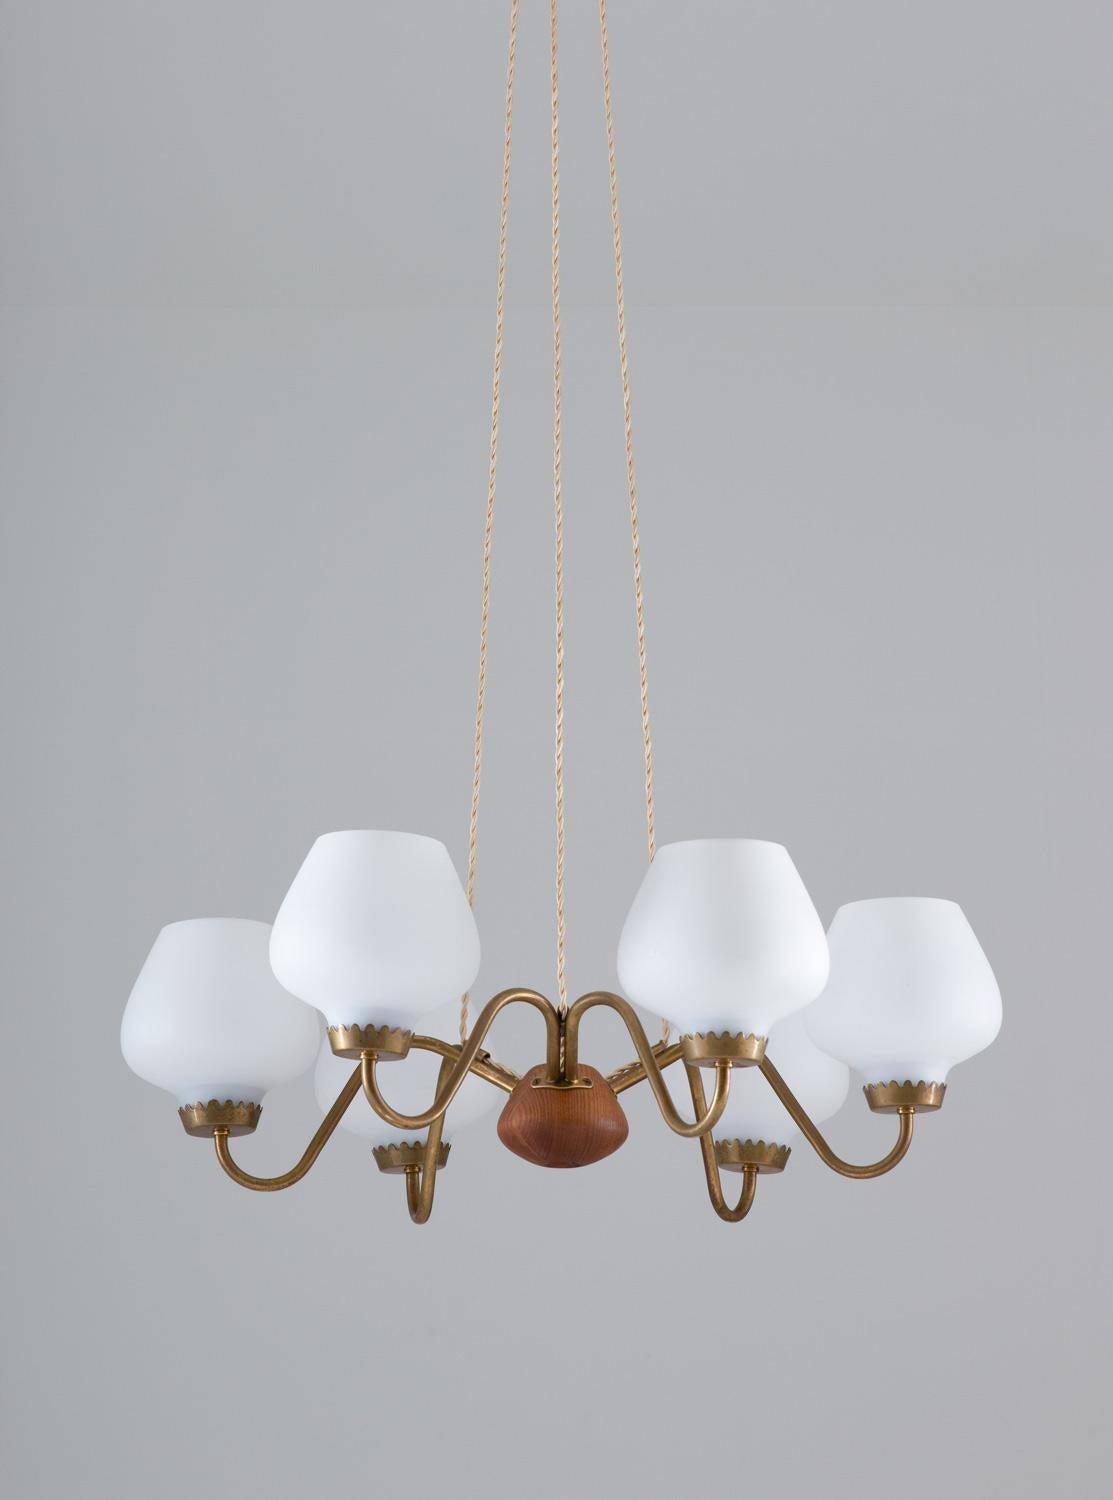 Midcentury pendant in brass, wood and frosted opaline glass manufactured by ASEA and attributed to Hans Bergström, Sweden, 1940s.
This great looking pendant is made with high quality and great details. It features six-light sources, hidden by